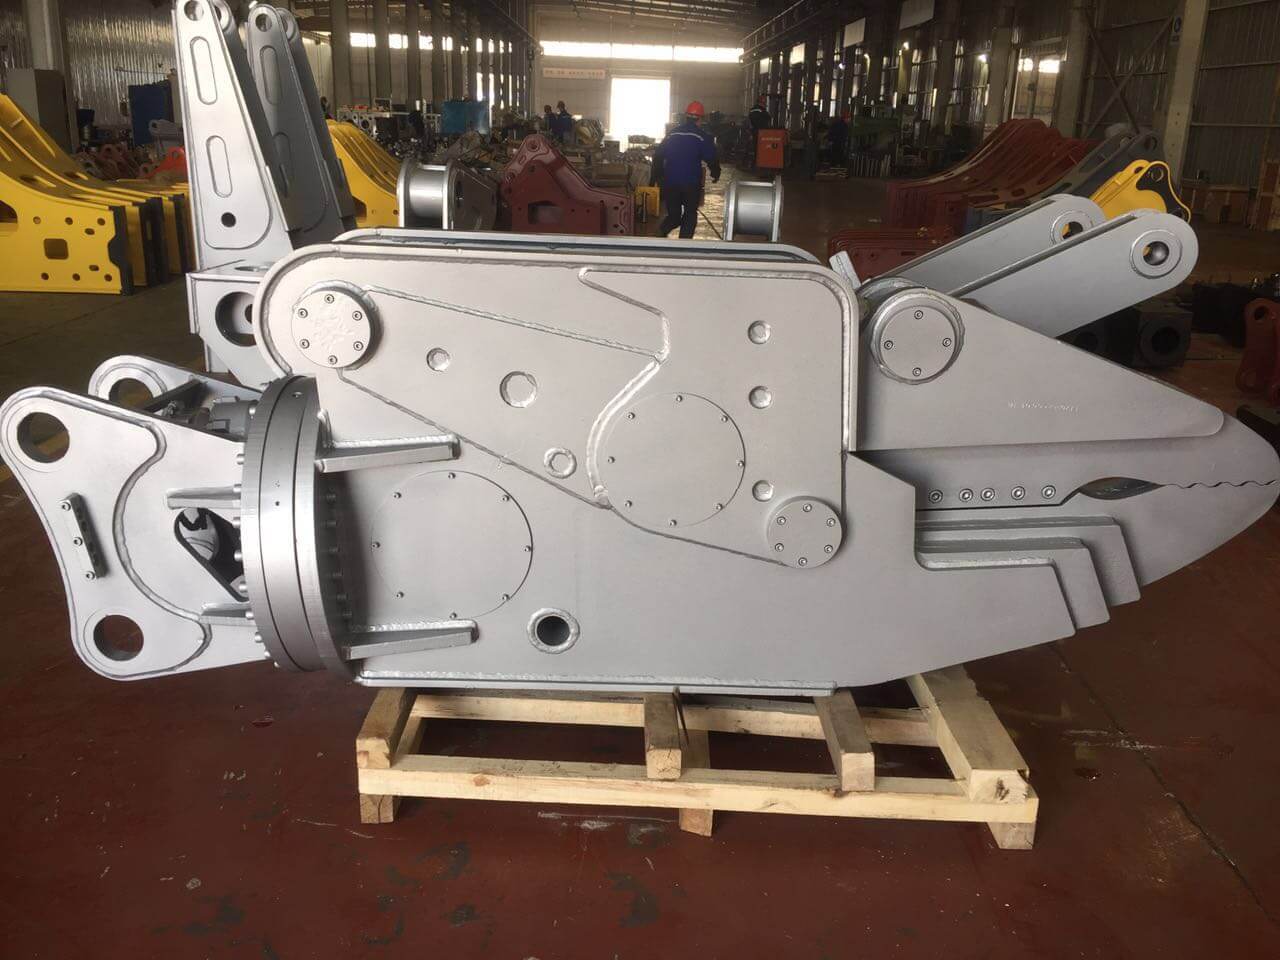 Look! This is the best selling products - Hydraulic Shear